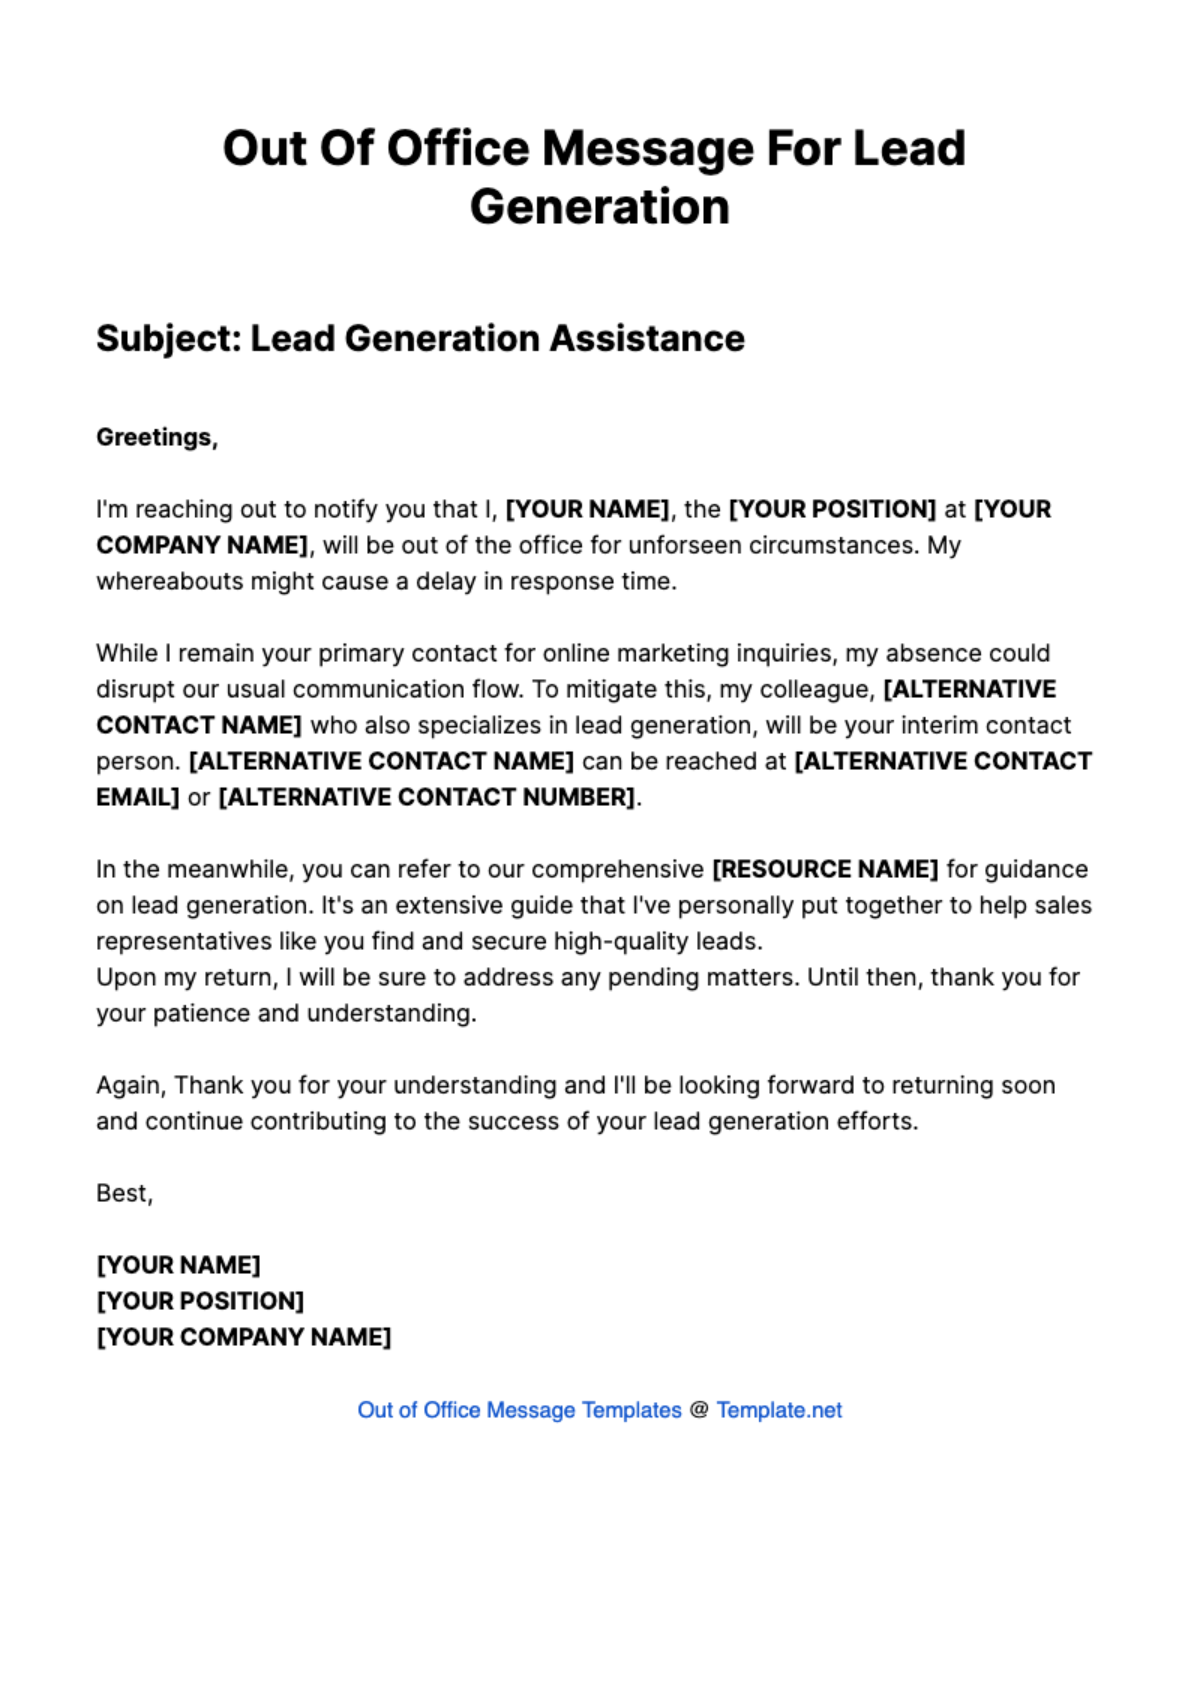 Out Of Office Message For Lead Generation Template